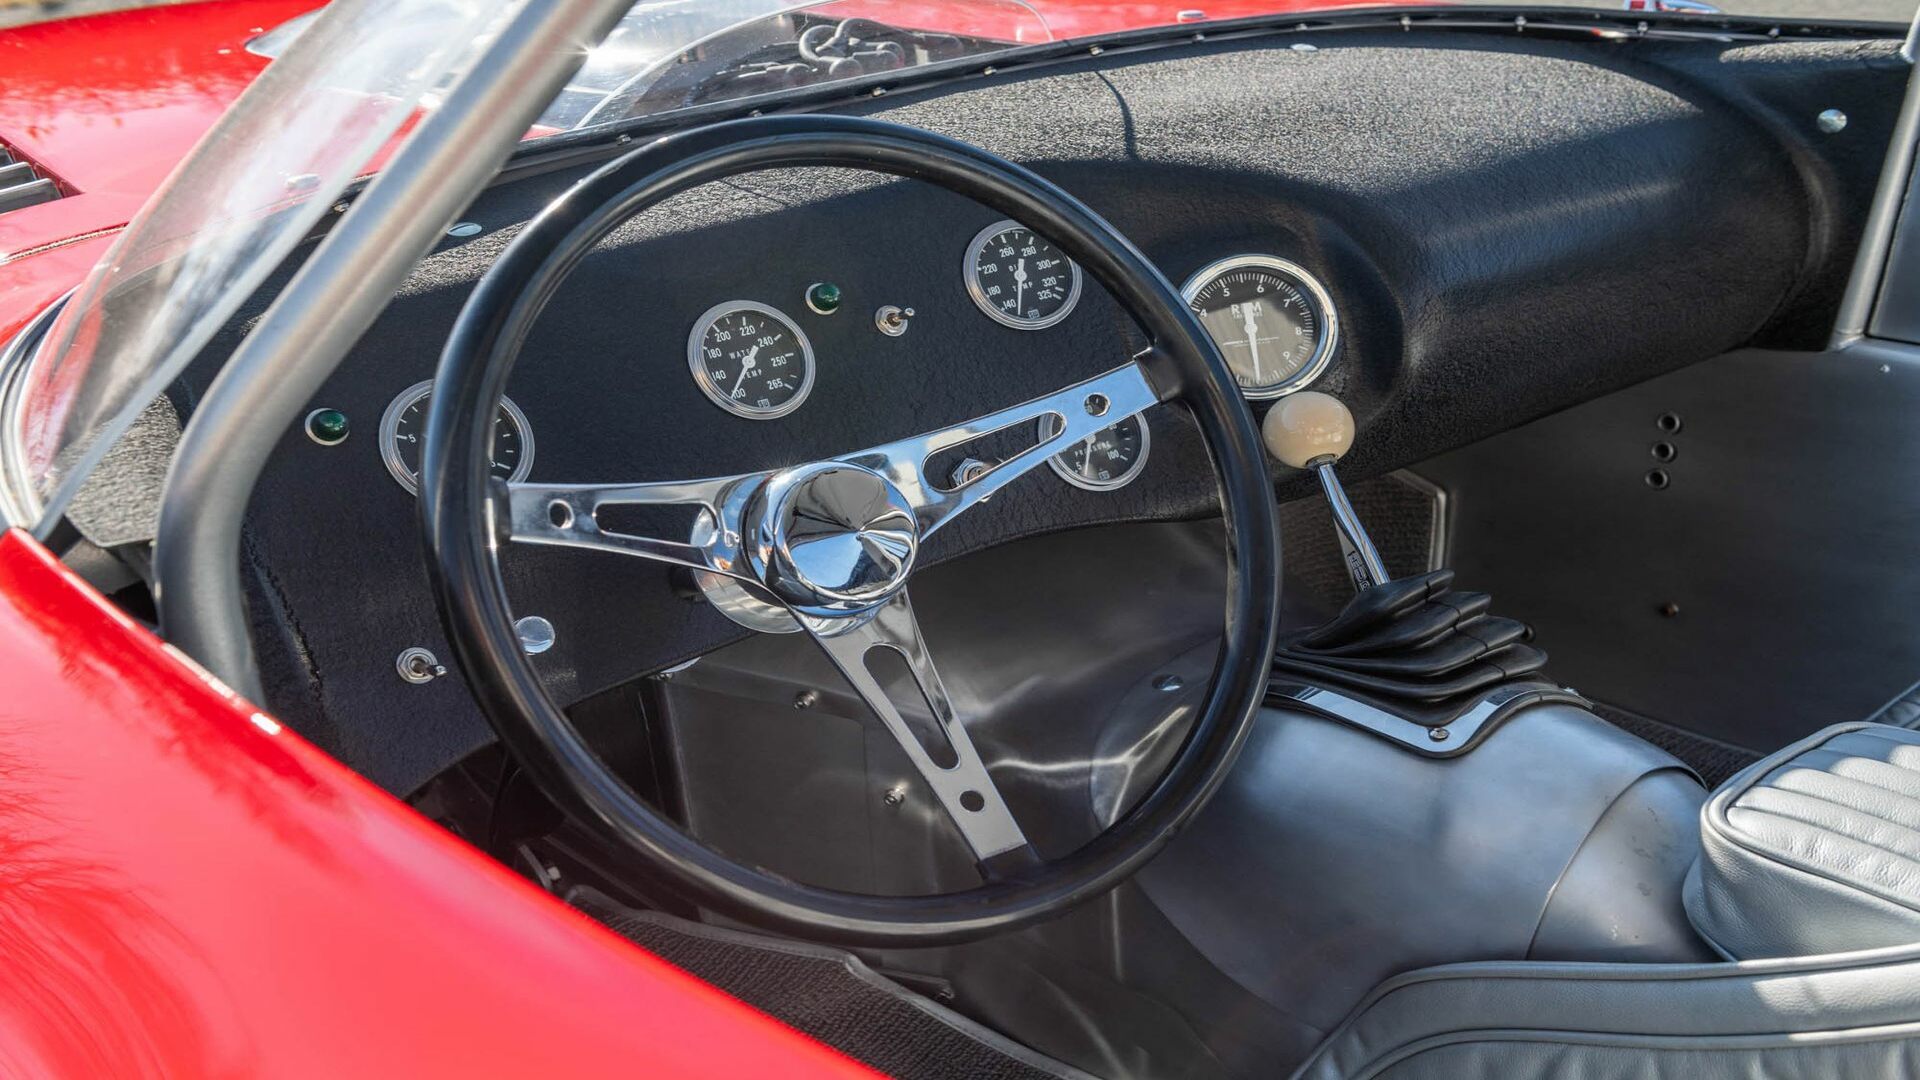 The Interior, Steering, And Dashboard Of The 1964 Cheetah #002 Prototype On Auction (Credits Hemmings)